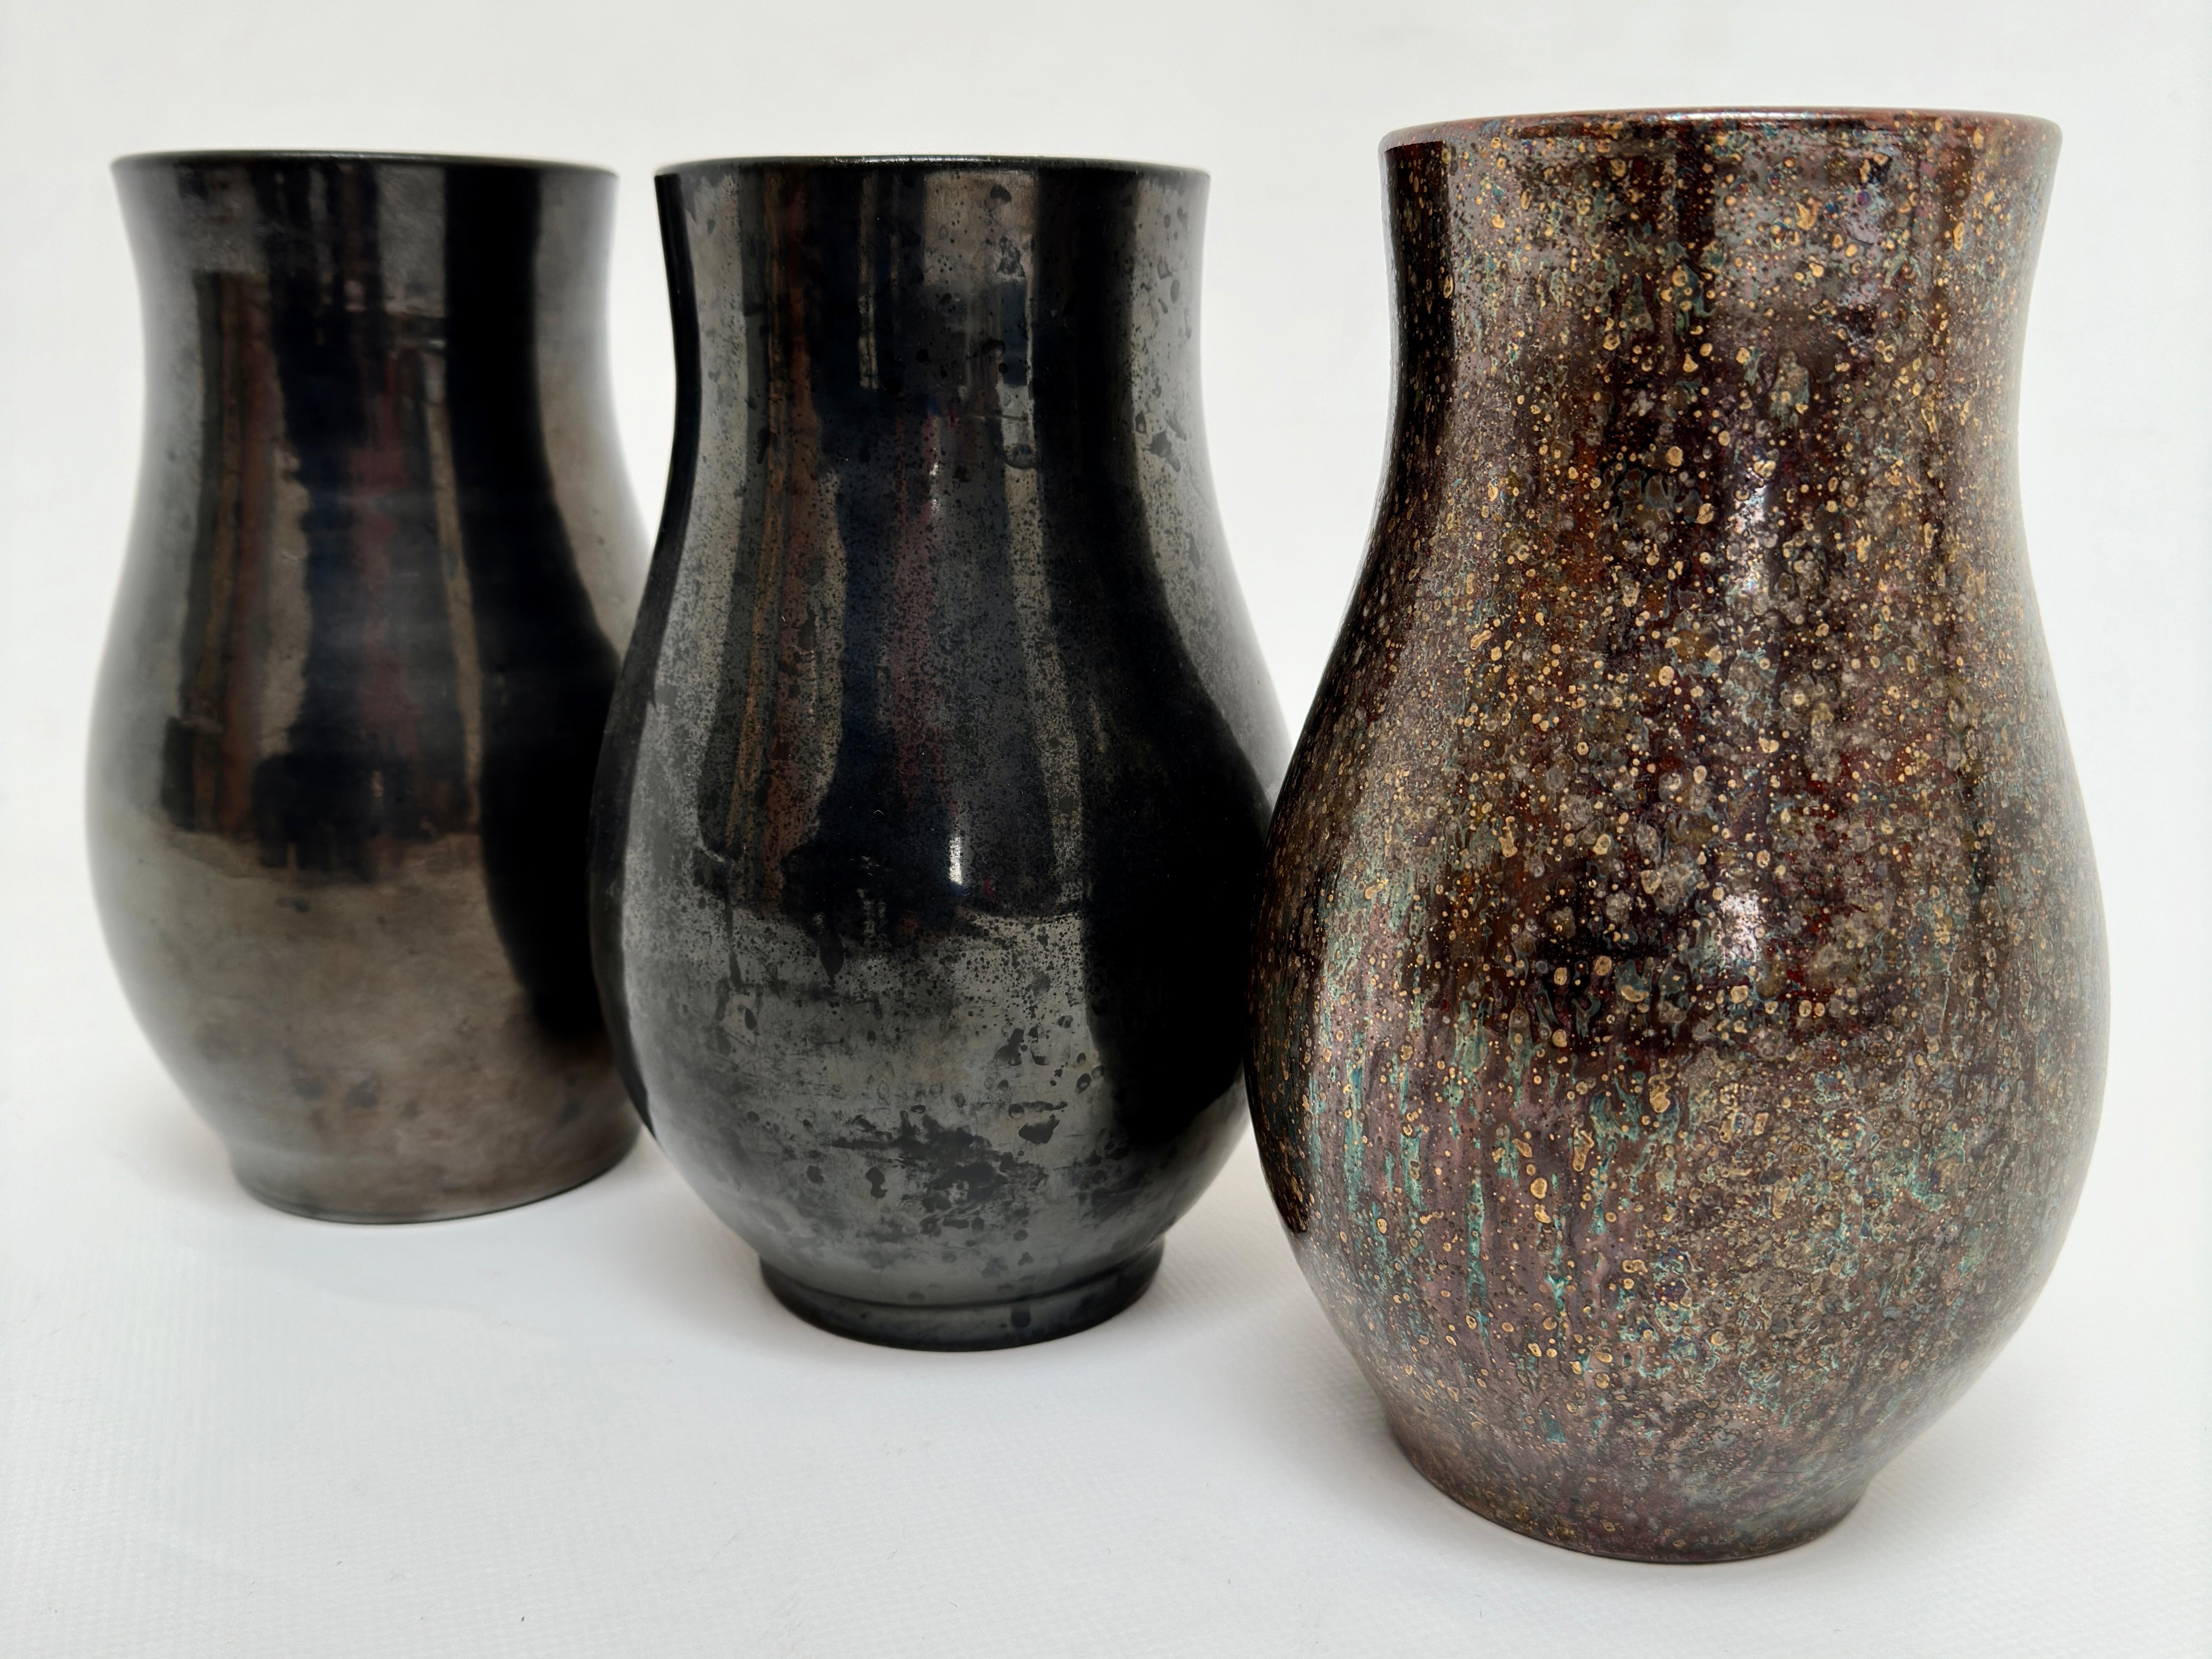 Set of 3 vases with clean lines and metallic glazes.

They are are handcrafted and so, have slight differences in proportions.
They are all in excellent condition and have not been the subject of any restoration.

Each bears the handwritten mention